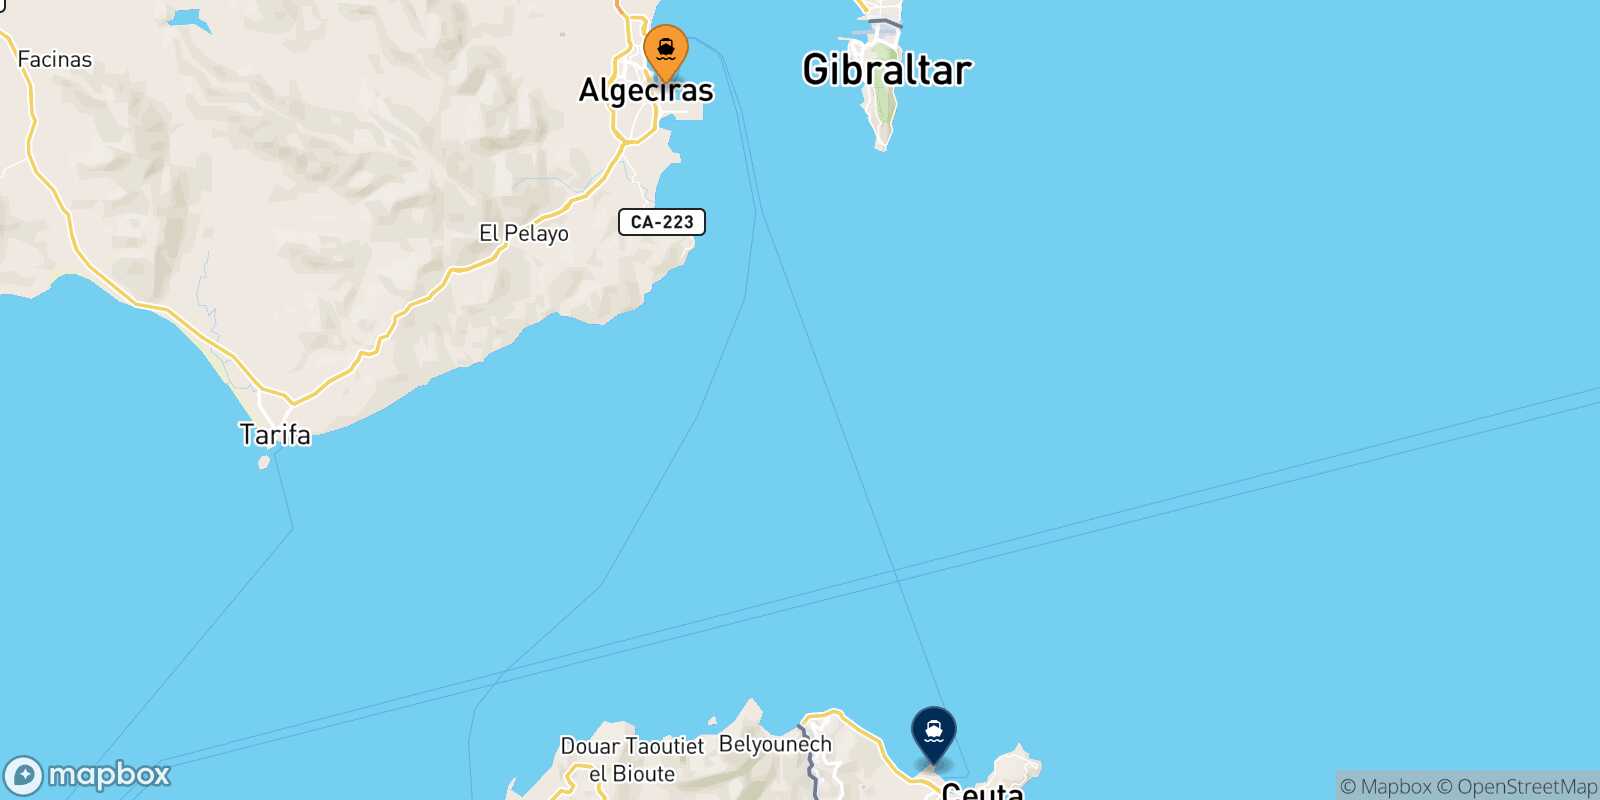 Map of the destinations reachable from Algeciras